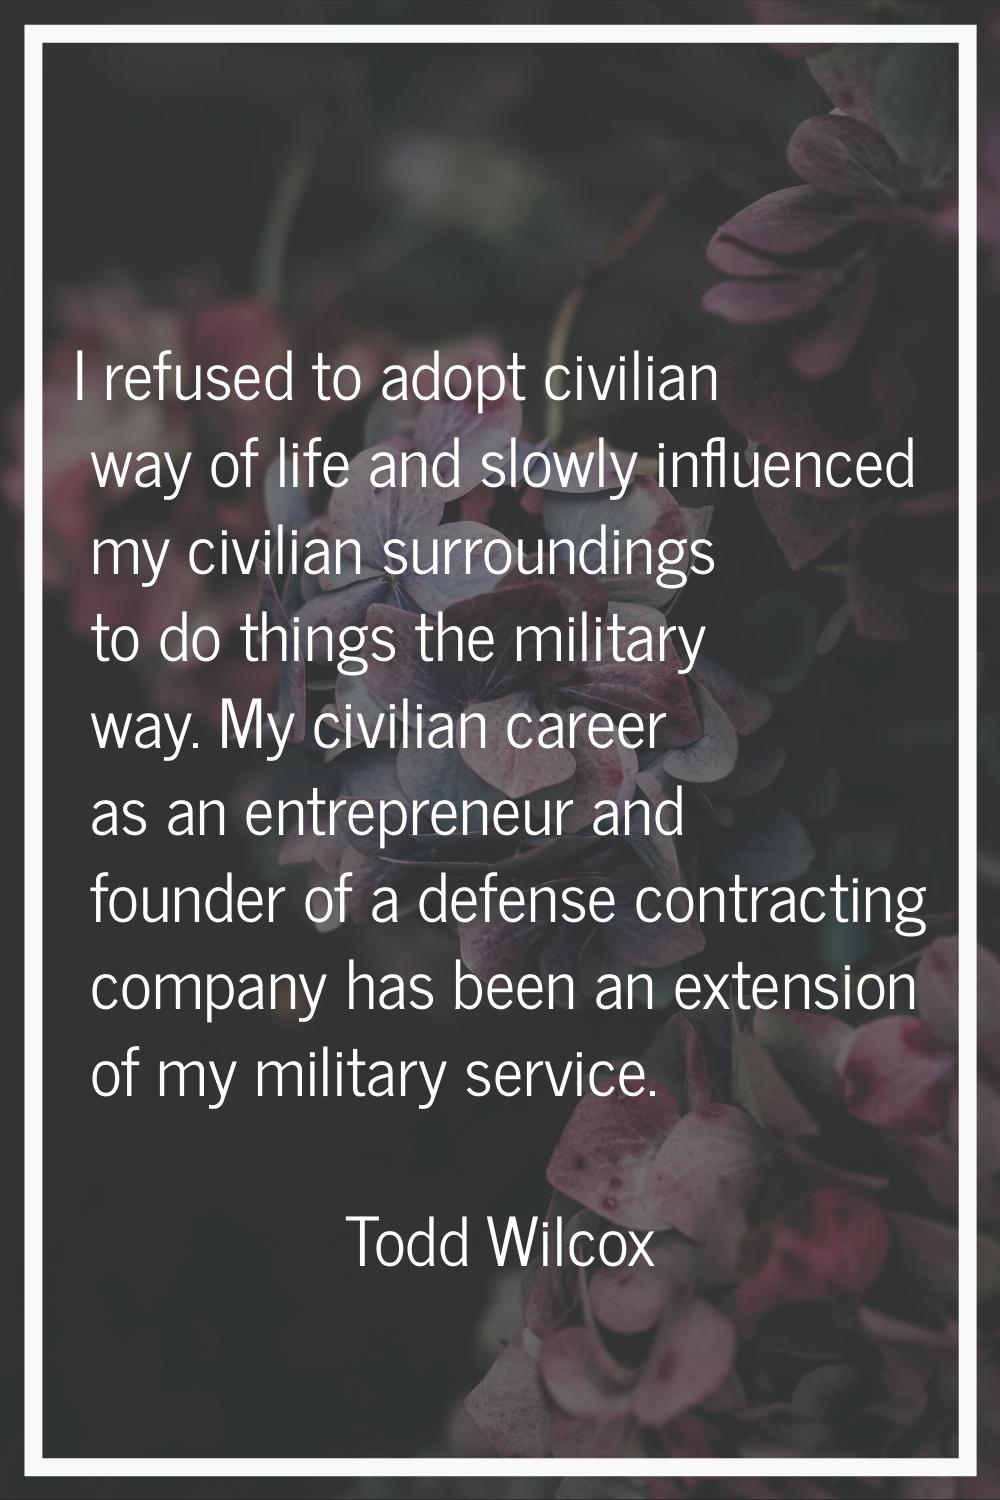 I refused to adopt civilian way of life and slowly influenced my civilian surroundings to do things